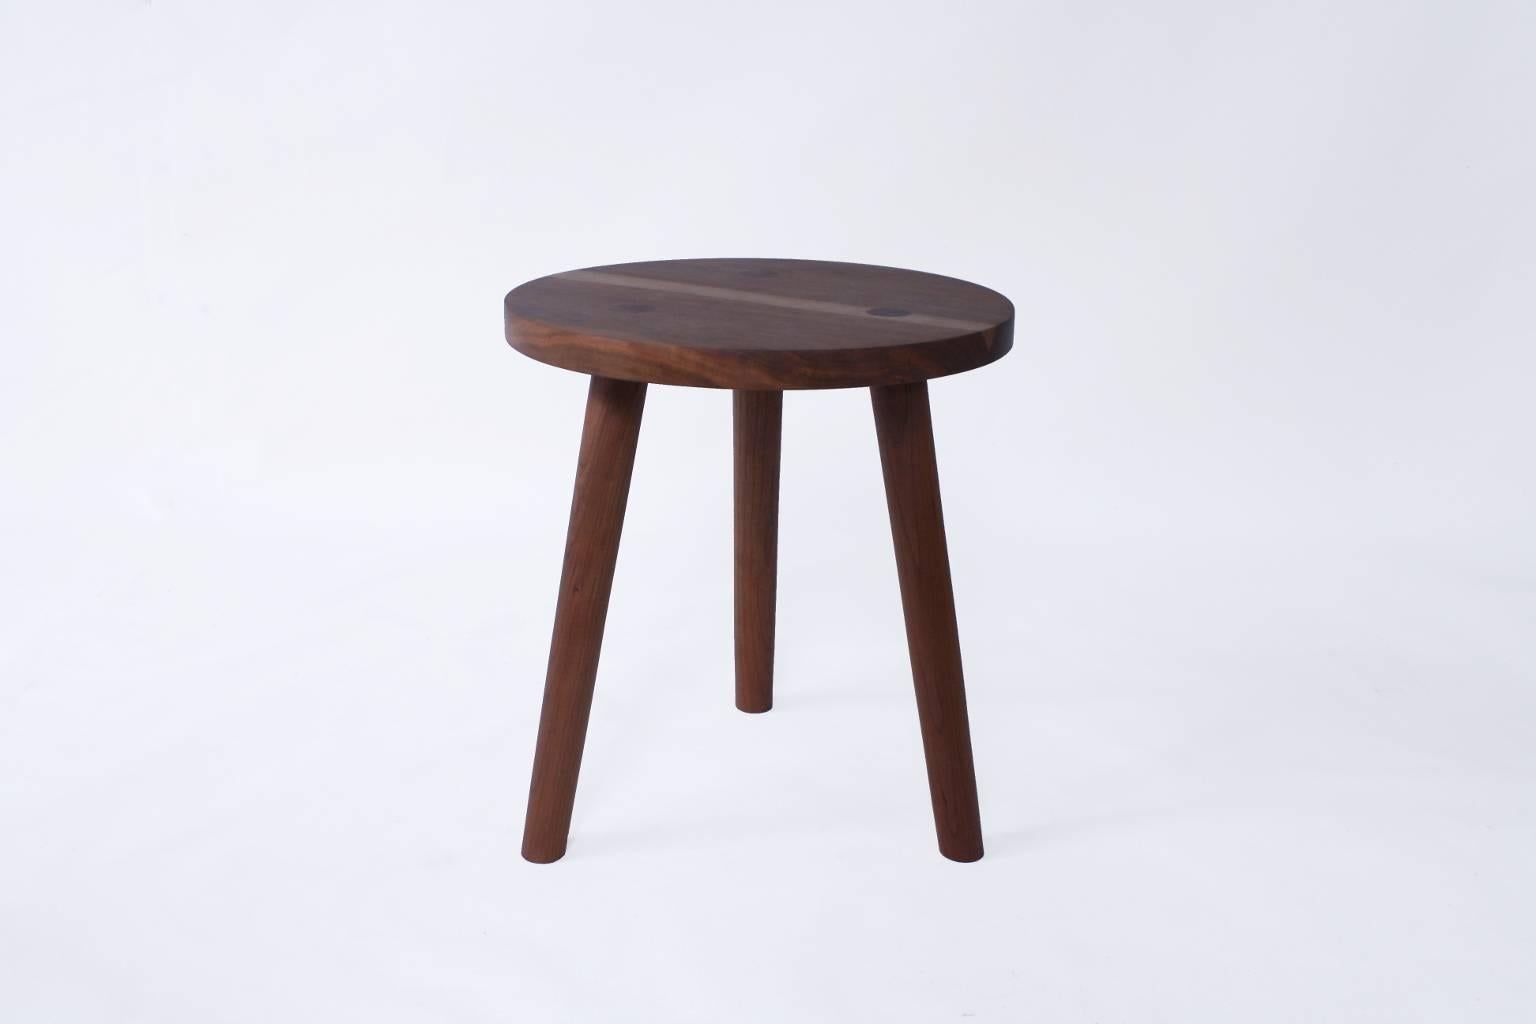 Ash Ebonized Walnut, A Solid Wood Stool or Side Table with Turned Legs For Sale